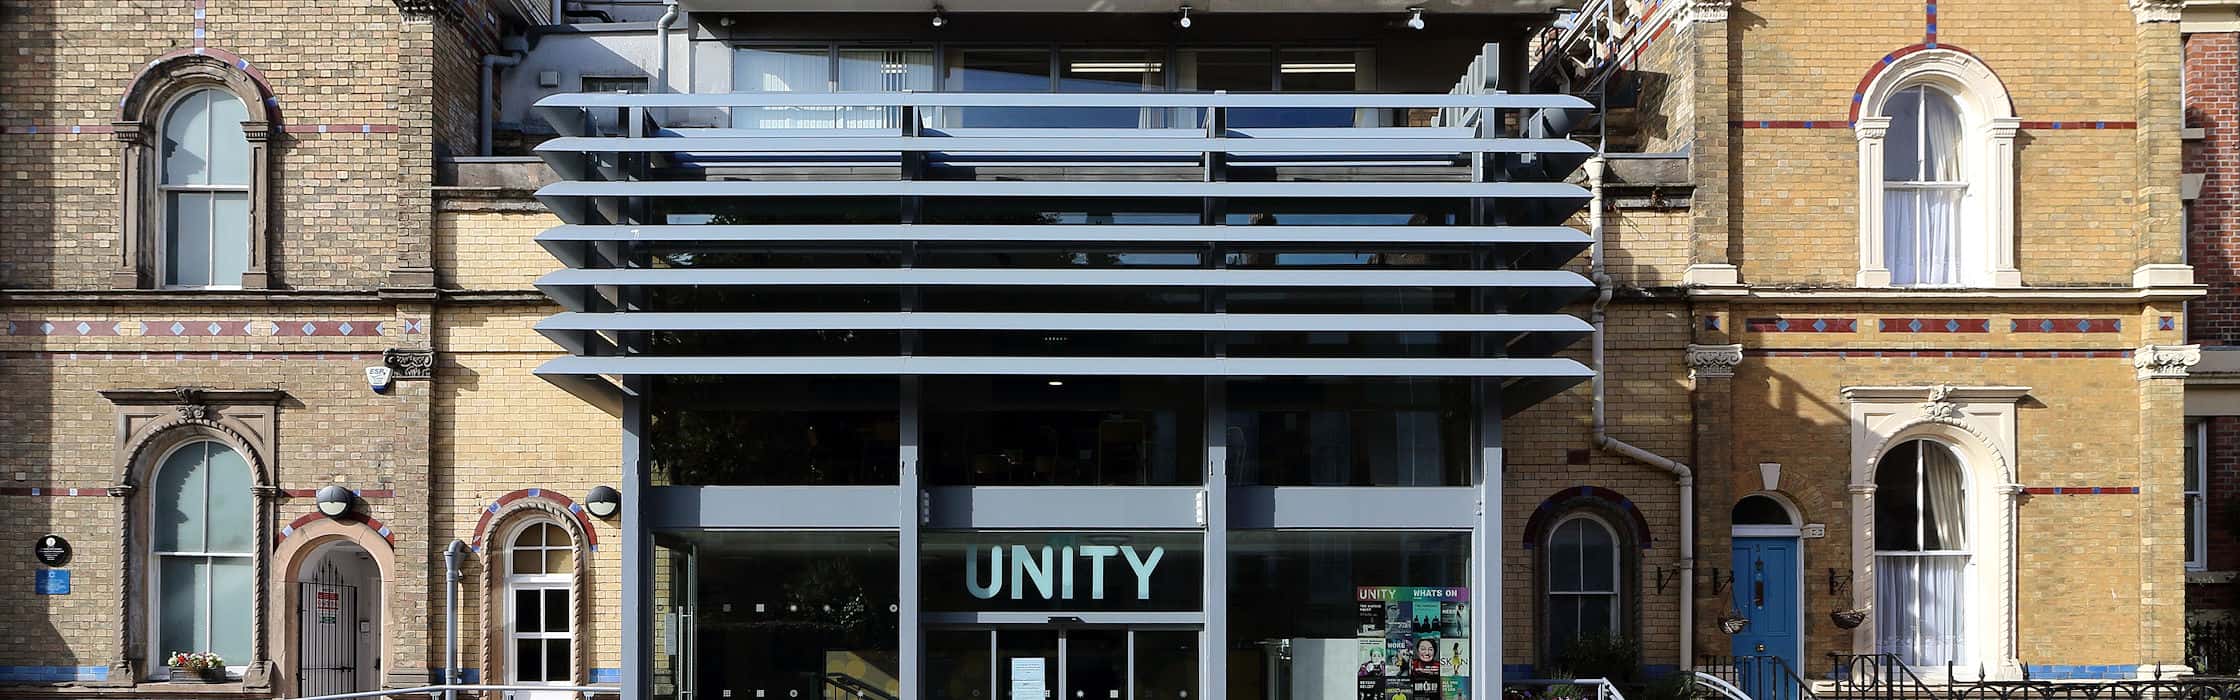 What's On at Unity Theatre, Liverpool